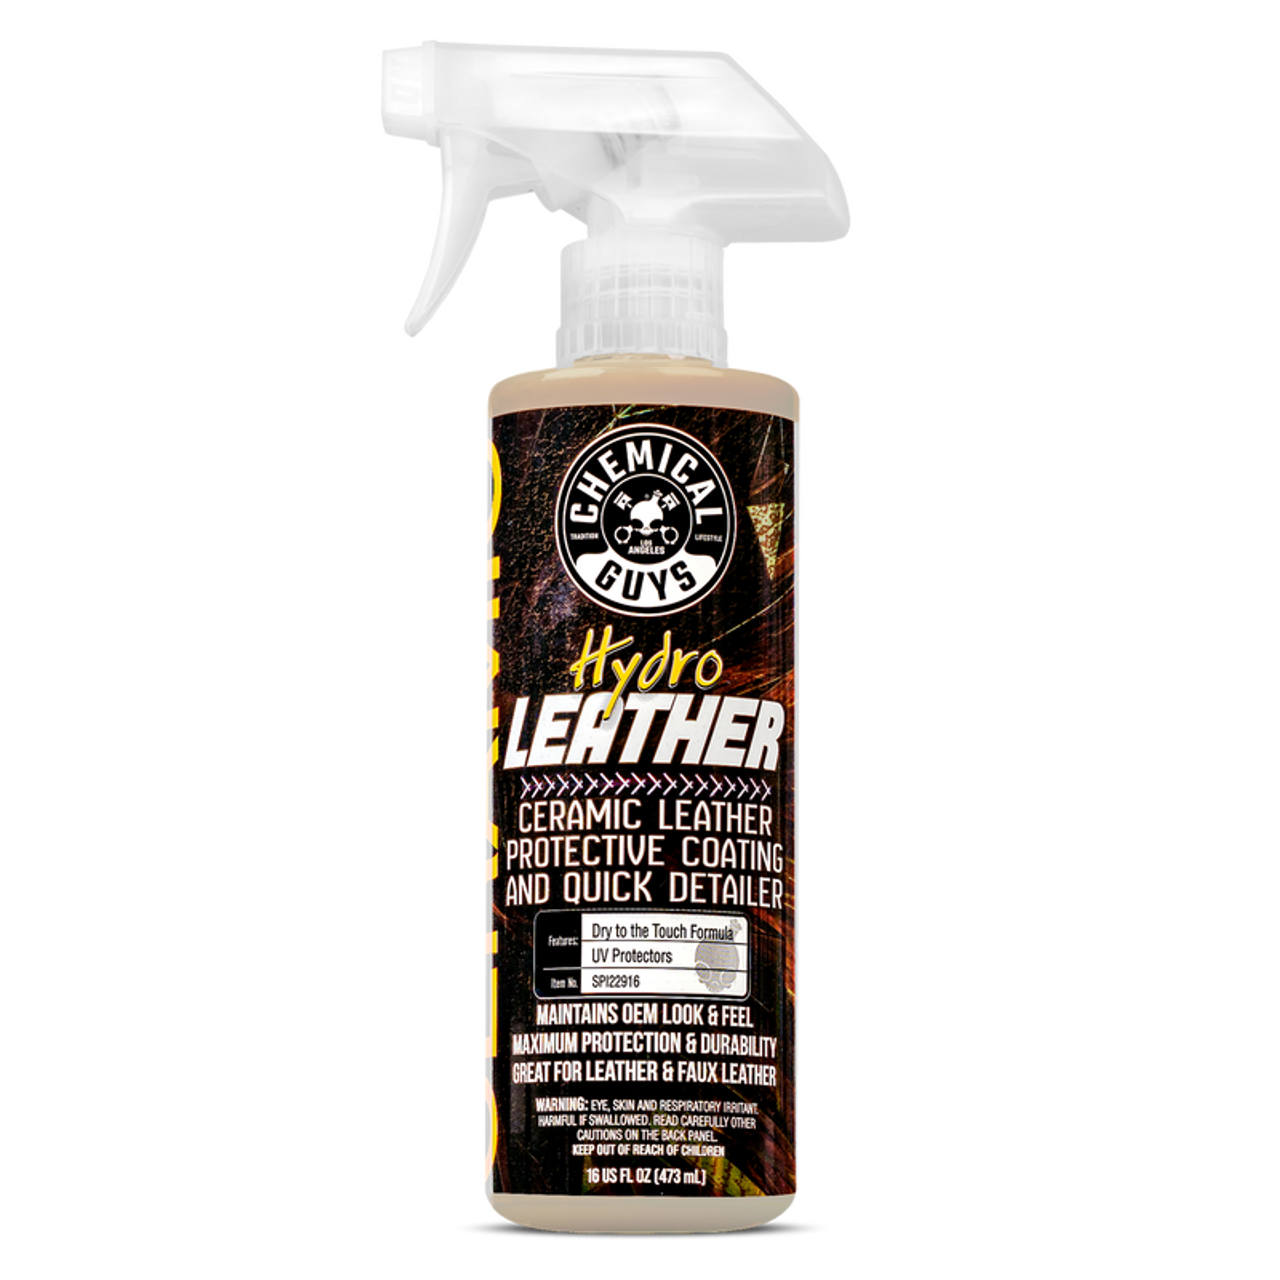 Chemical Guys HydroLeather Ceramic Leather Protective Coating - 16oz